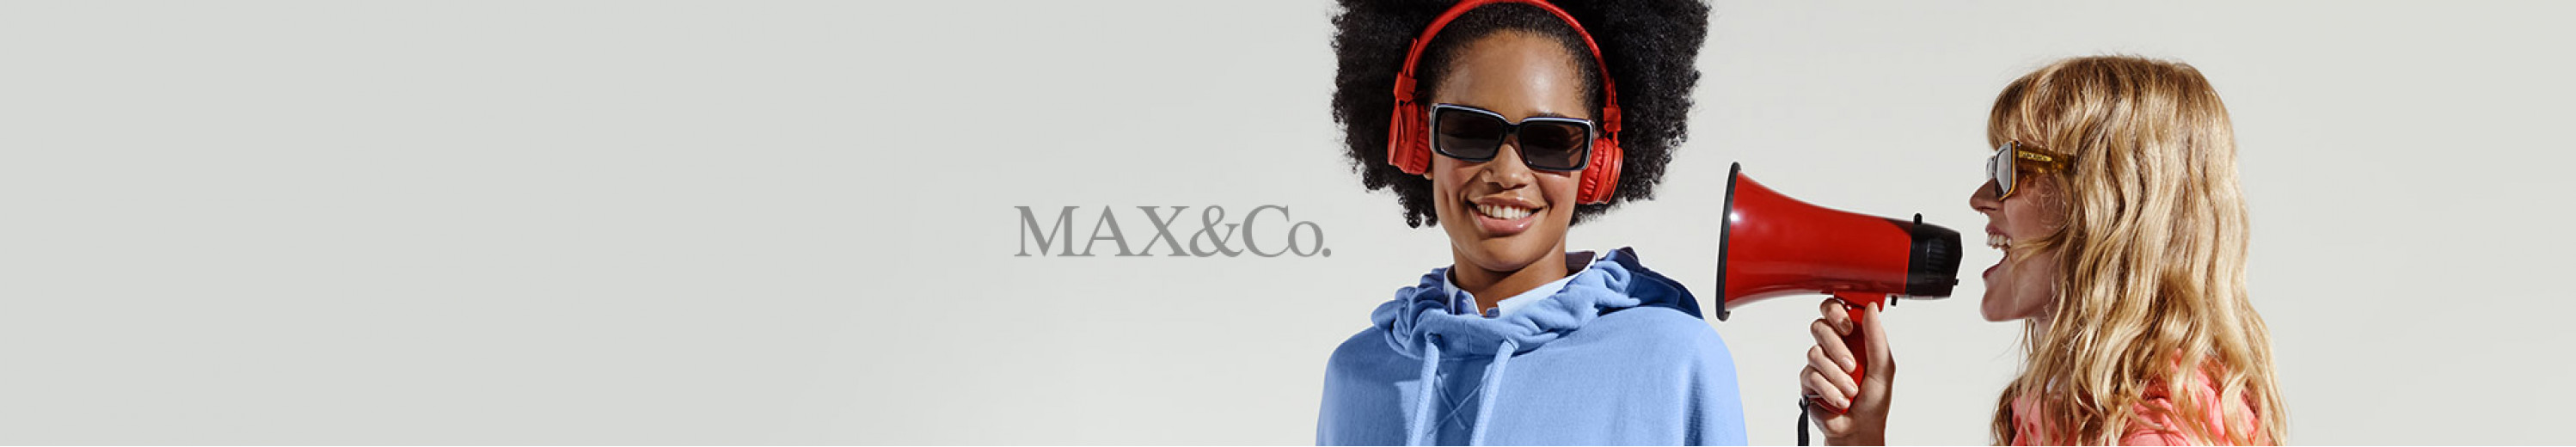 Max&Co Glasses and Eyewear